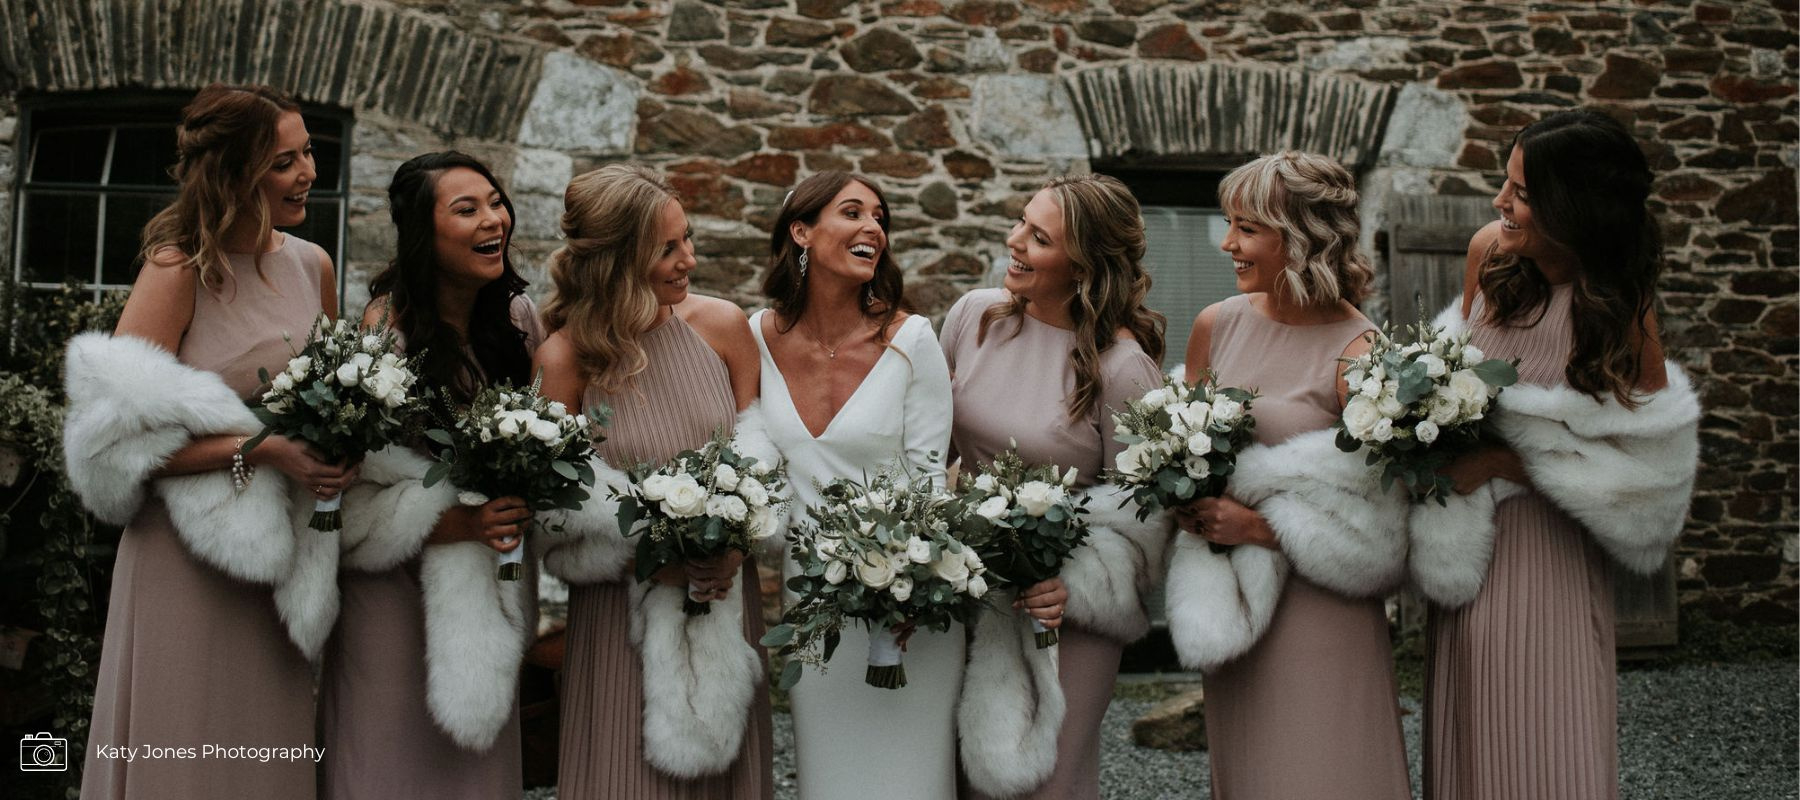 White winter bridal bouquets and bridesmaids holding flower posies of ranunculi's, veronica, eucalyptus and roses.